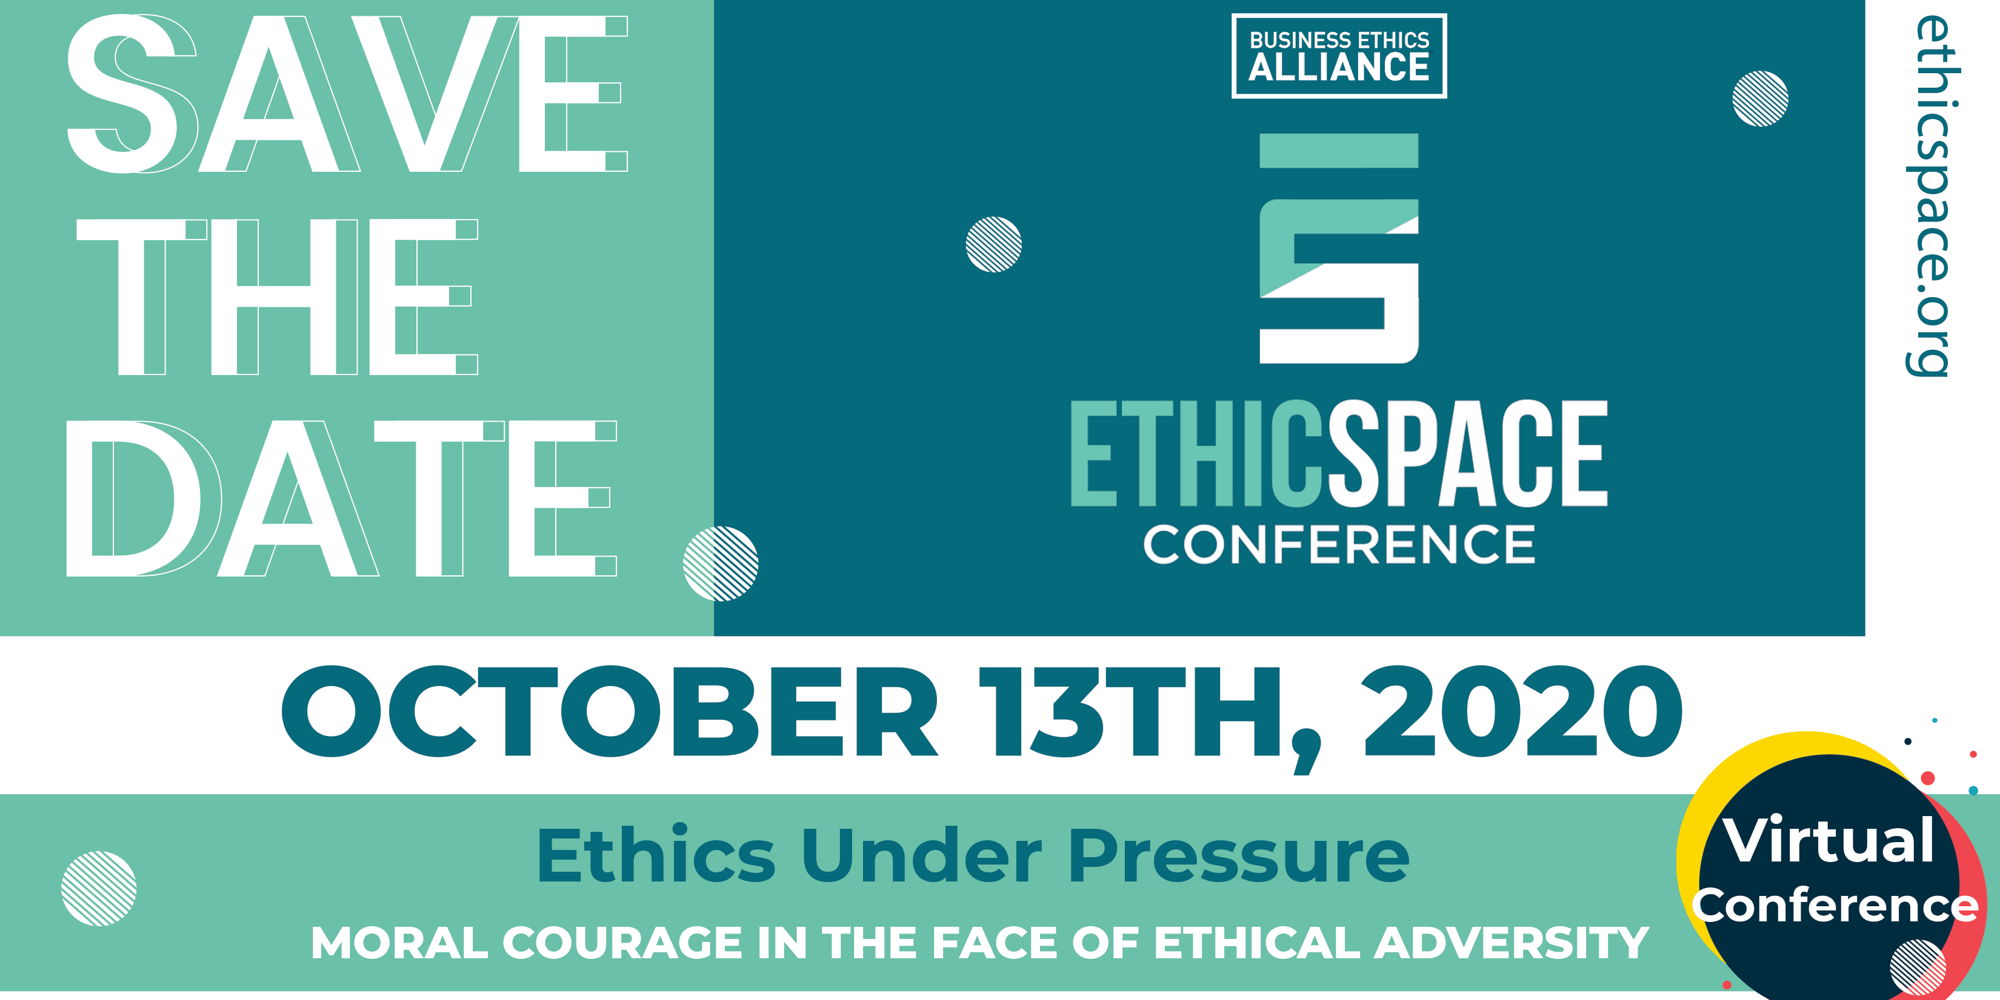 EthicSpace Conference promotional image